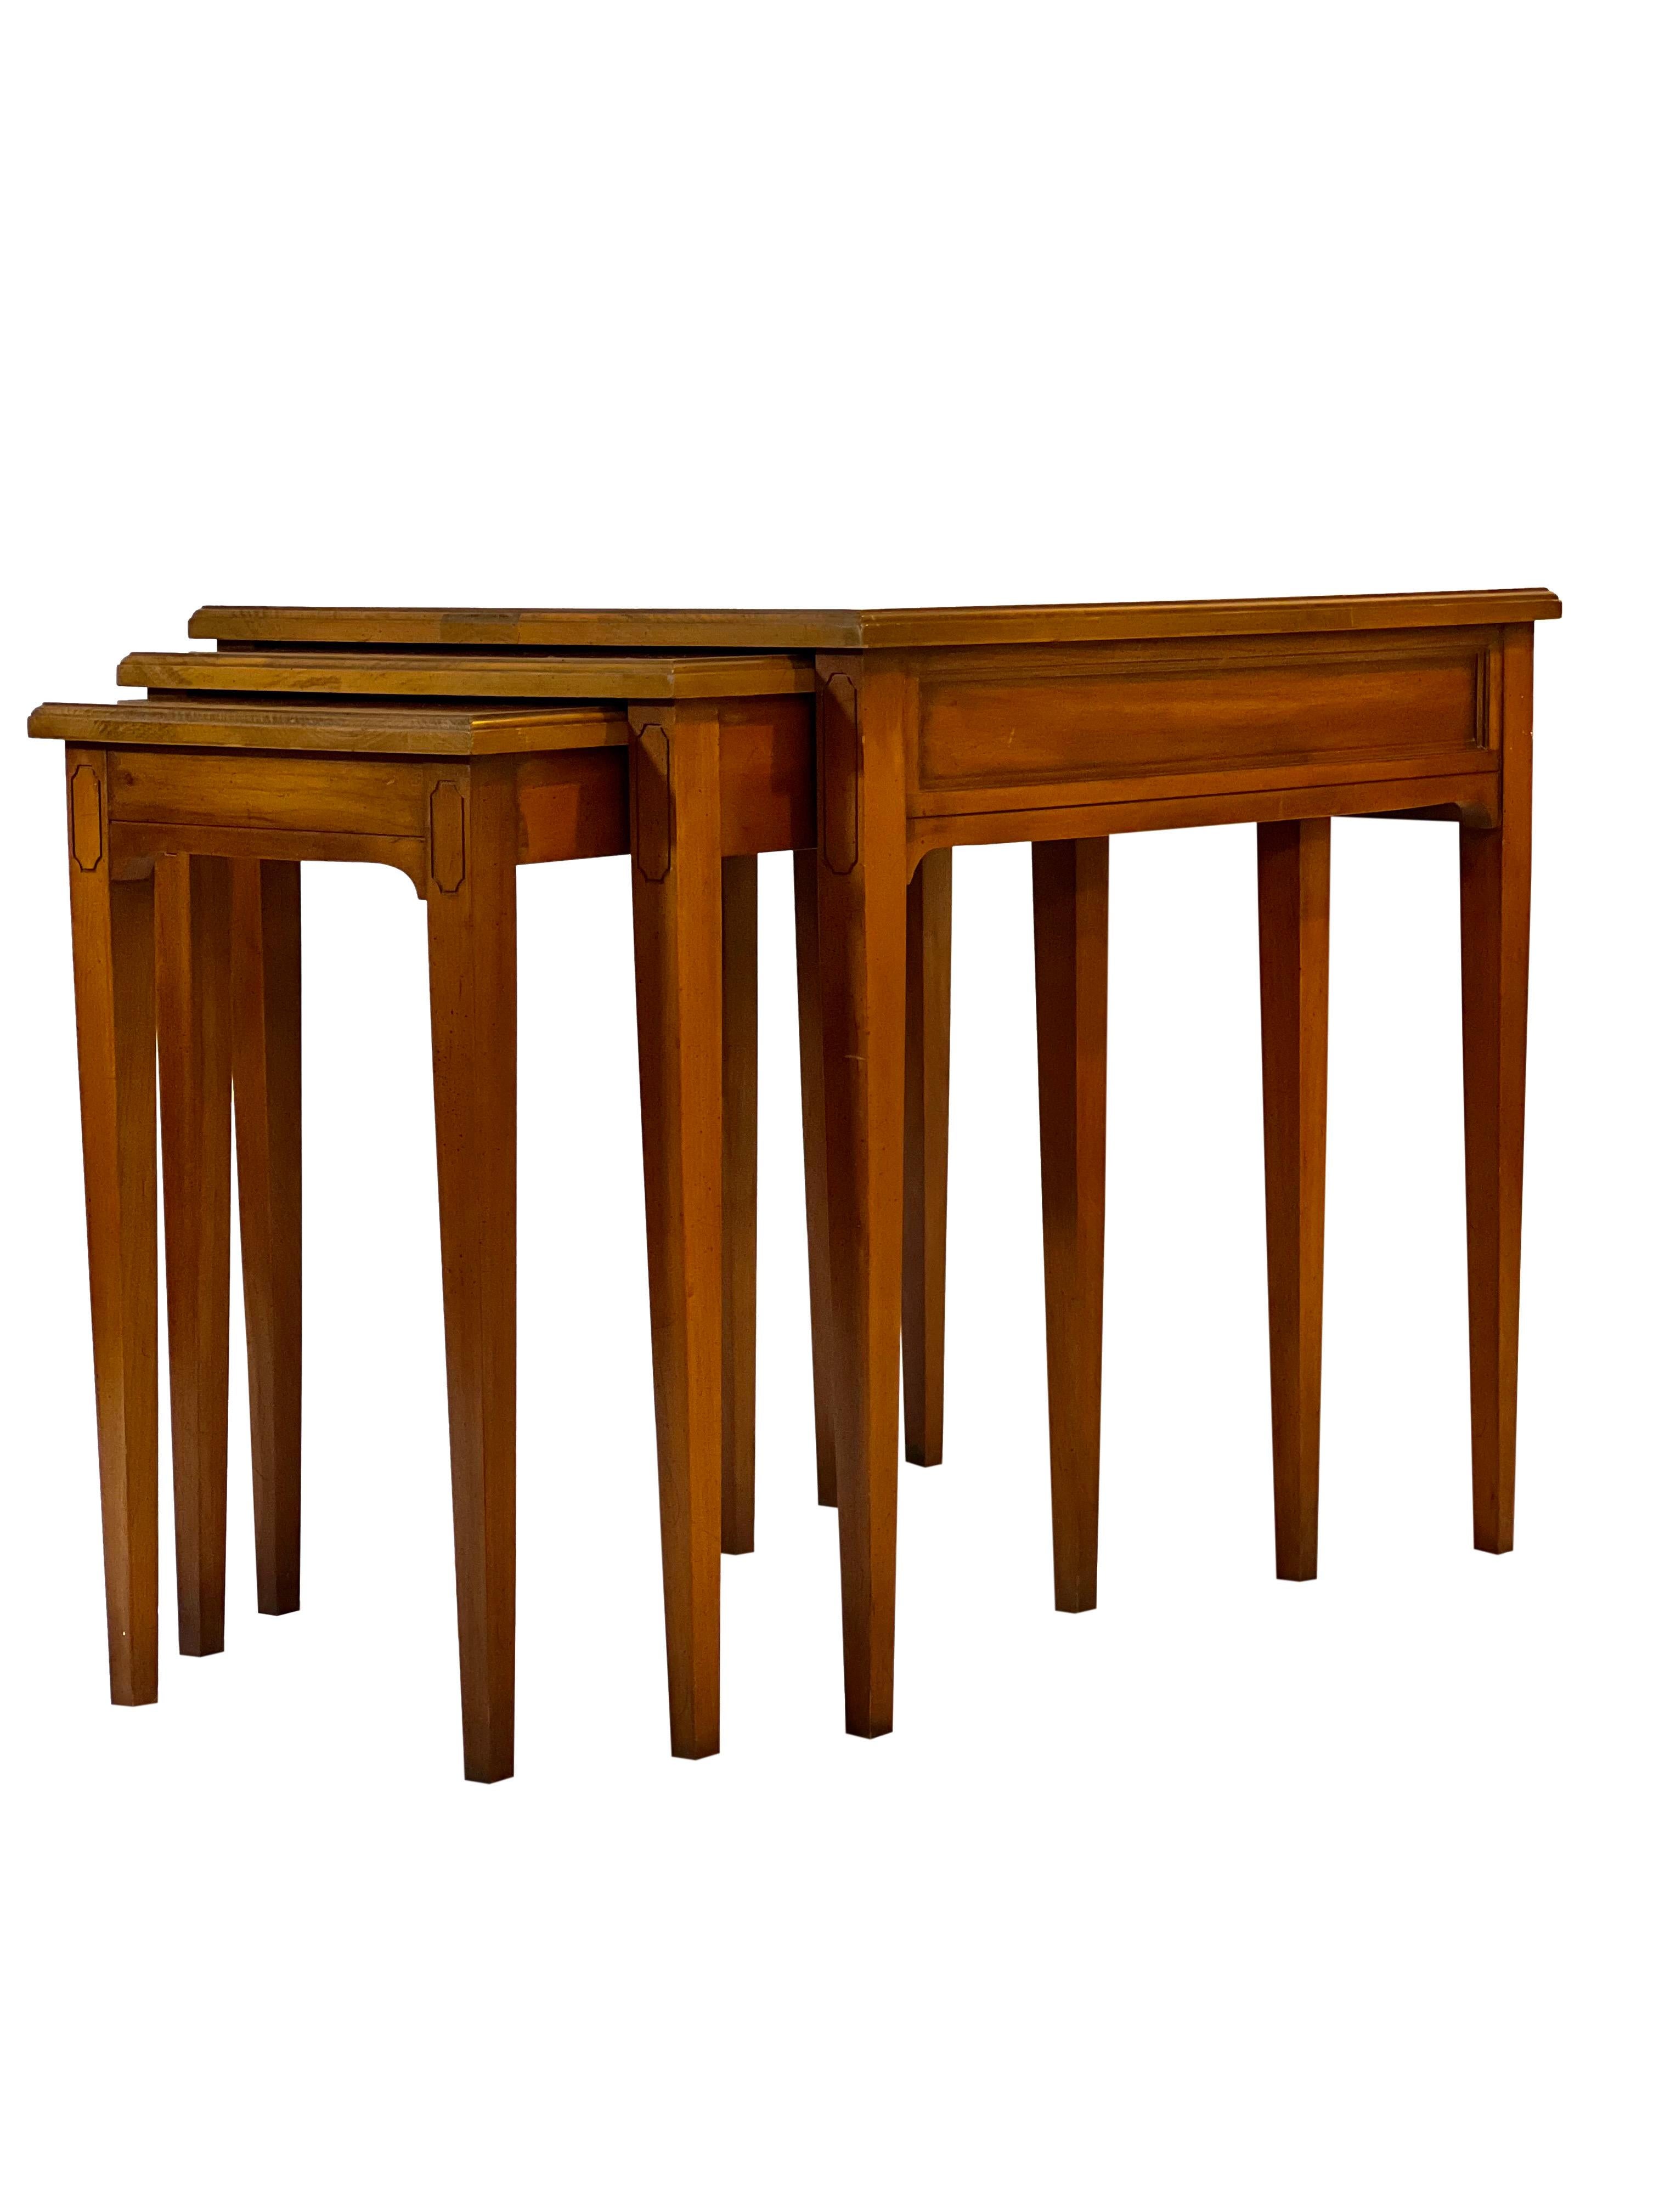 Midcentury Fruitwood Nesting Tables by Heritage, Set of 3 For Sale 7